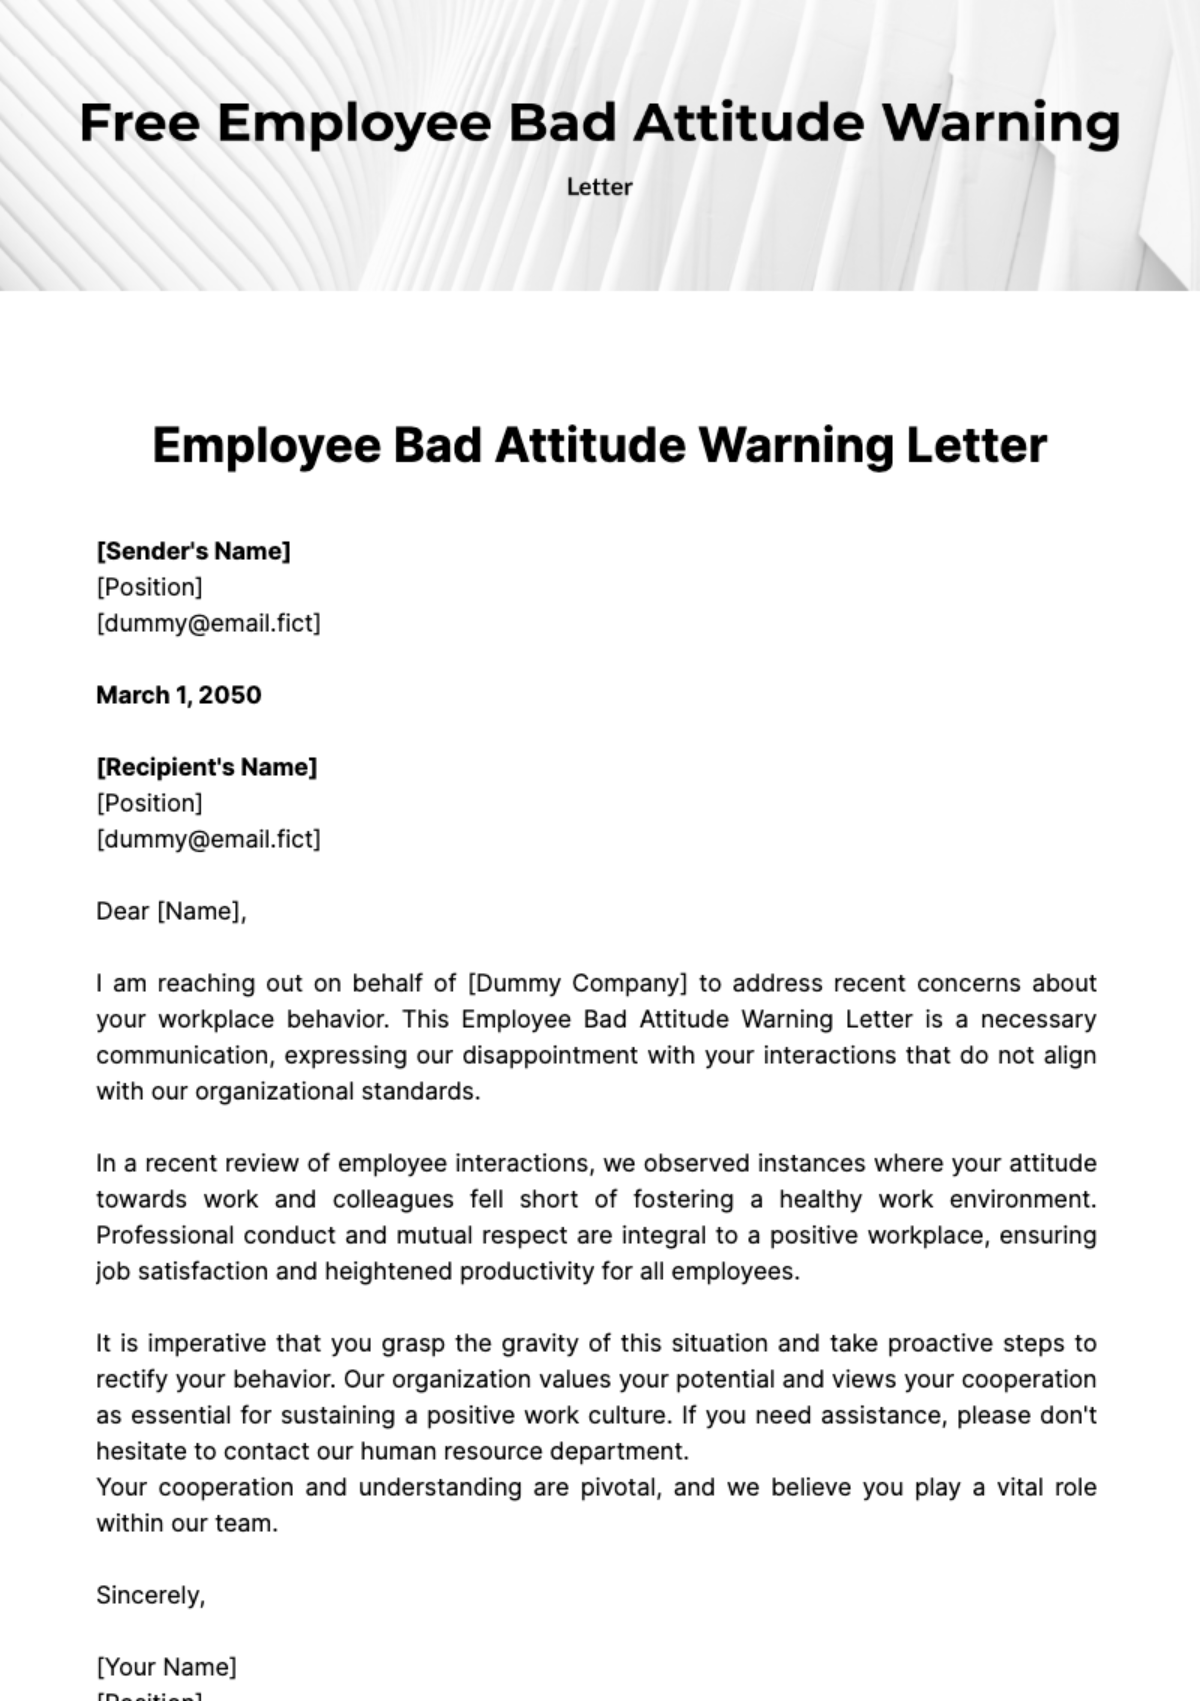 Free Employee Bad Attitude Warning Letter Template